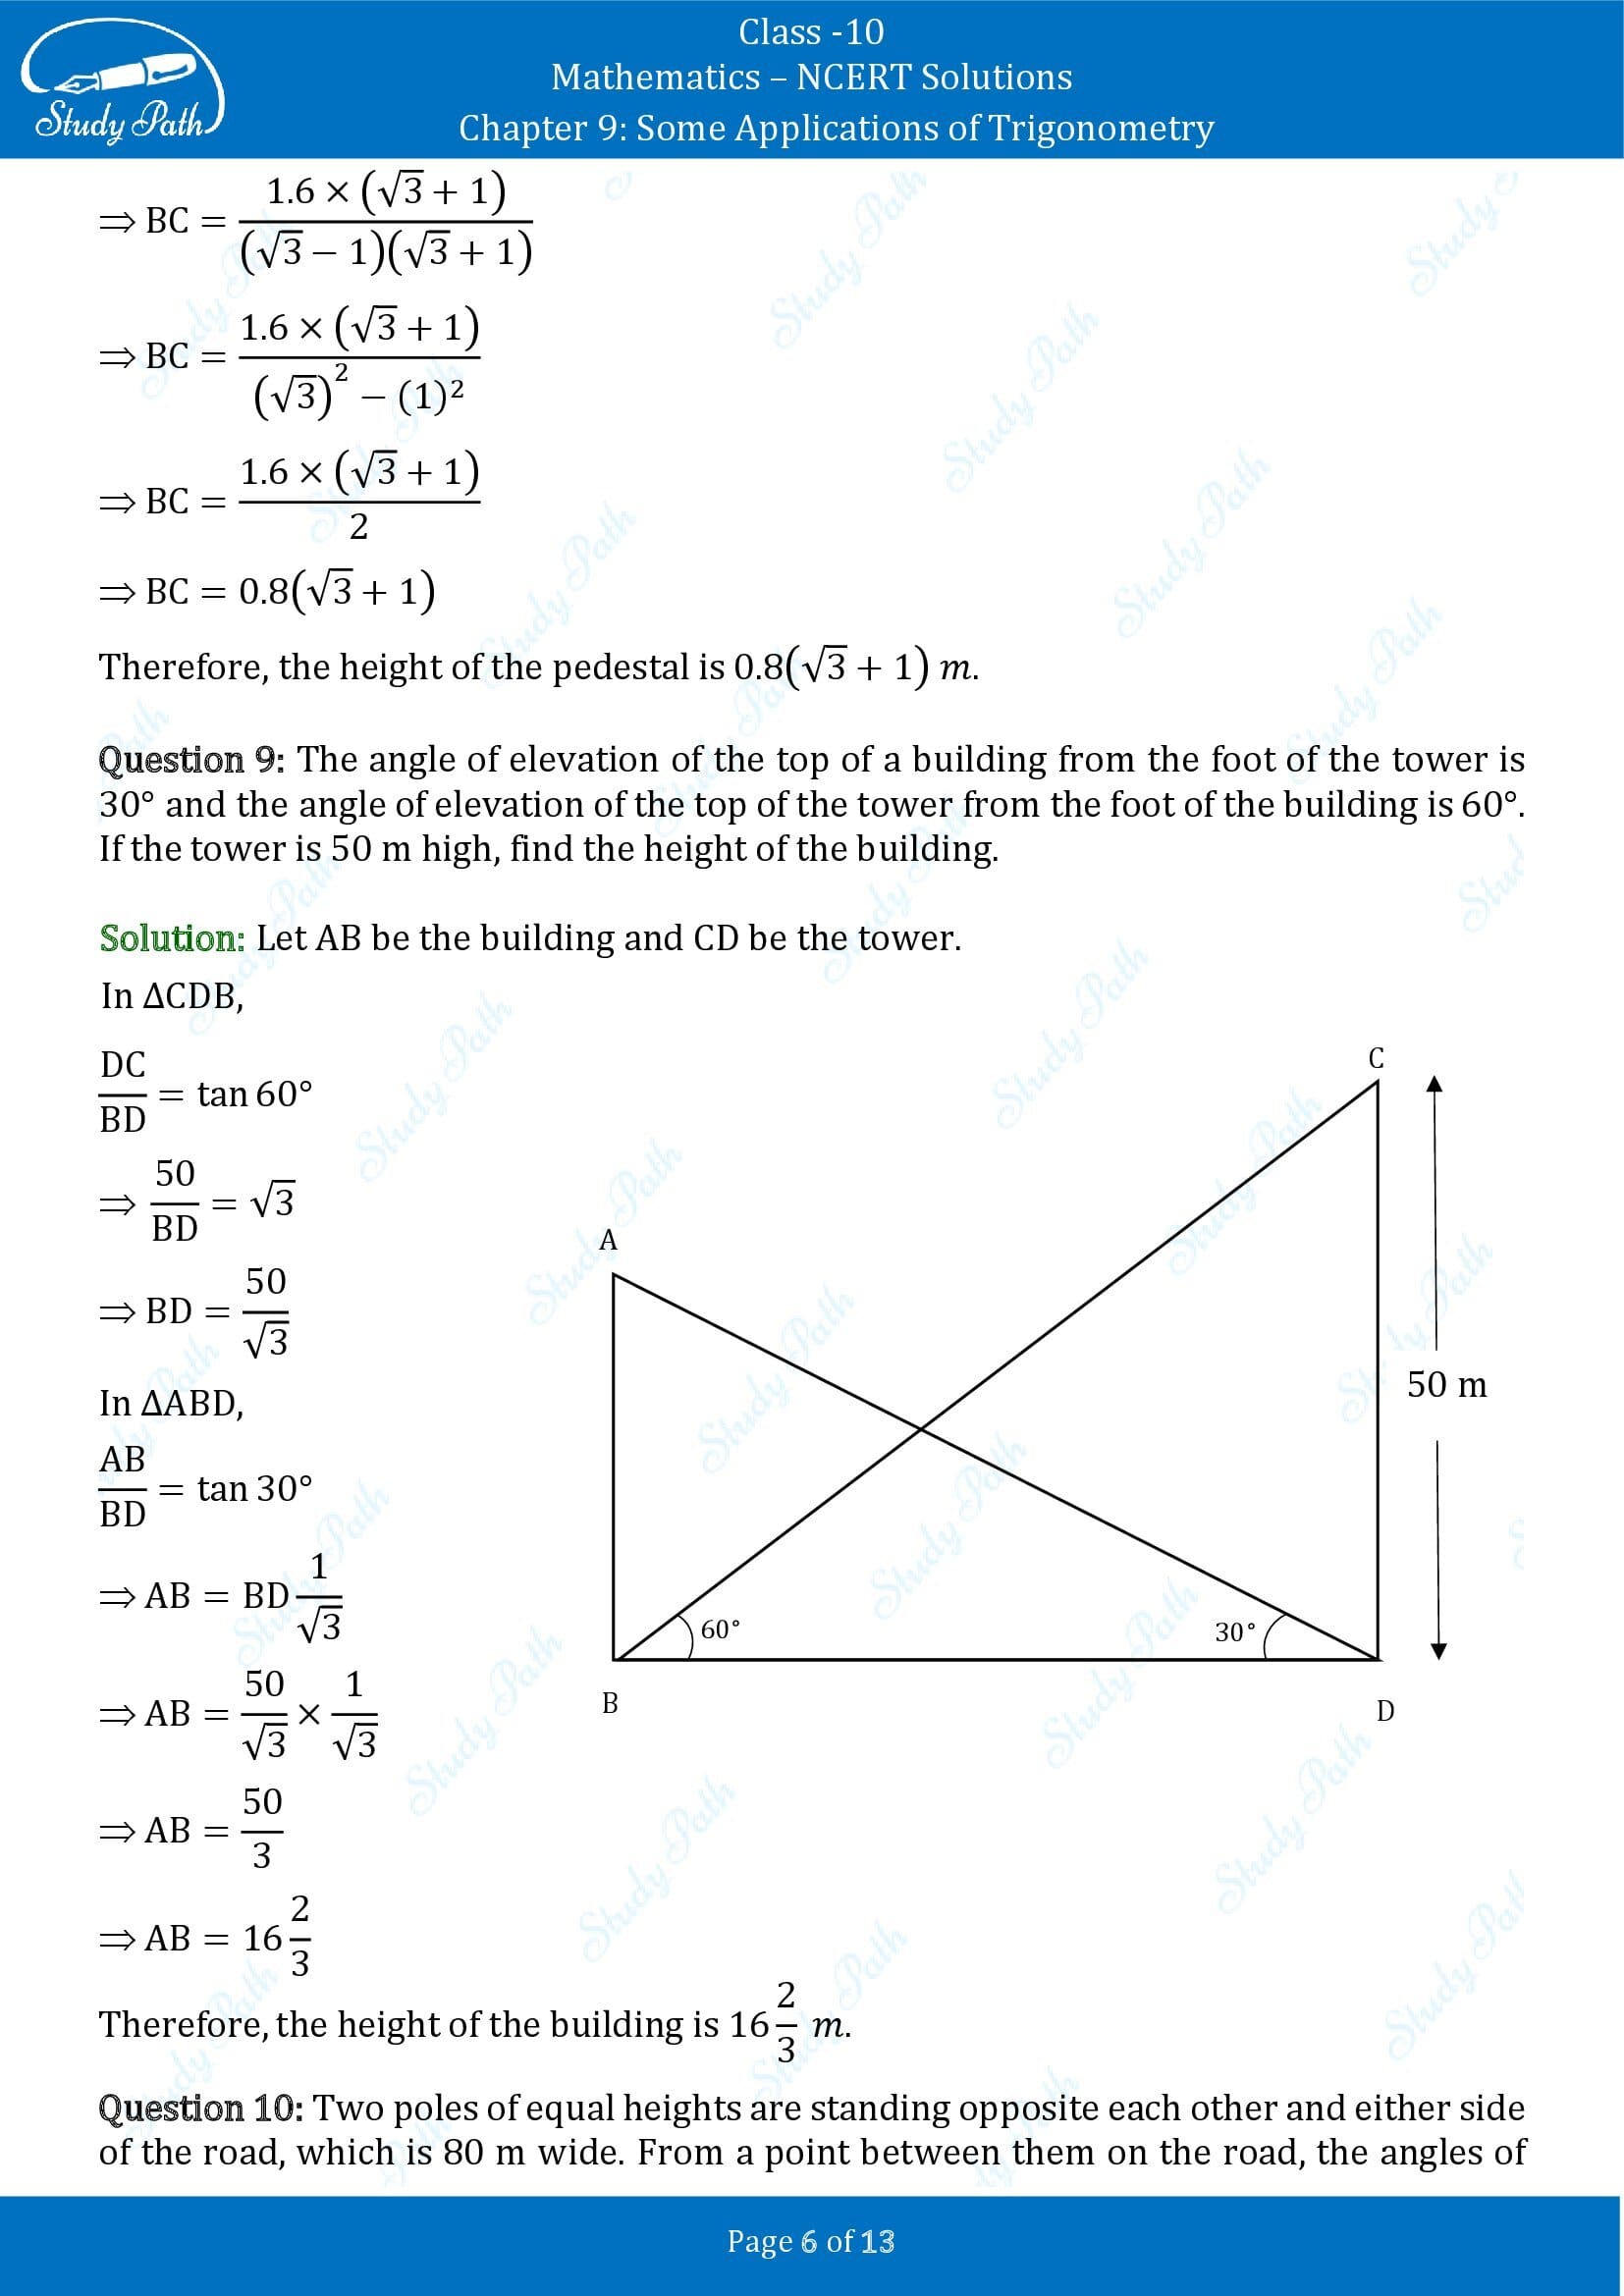 NCERT Solutions for Class 10 Maths Chapter 9 Some Applications of Trigonometry 00006